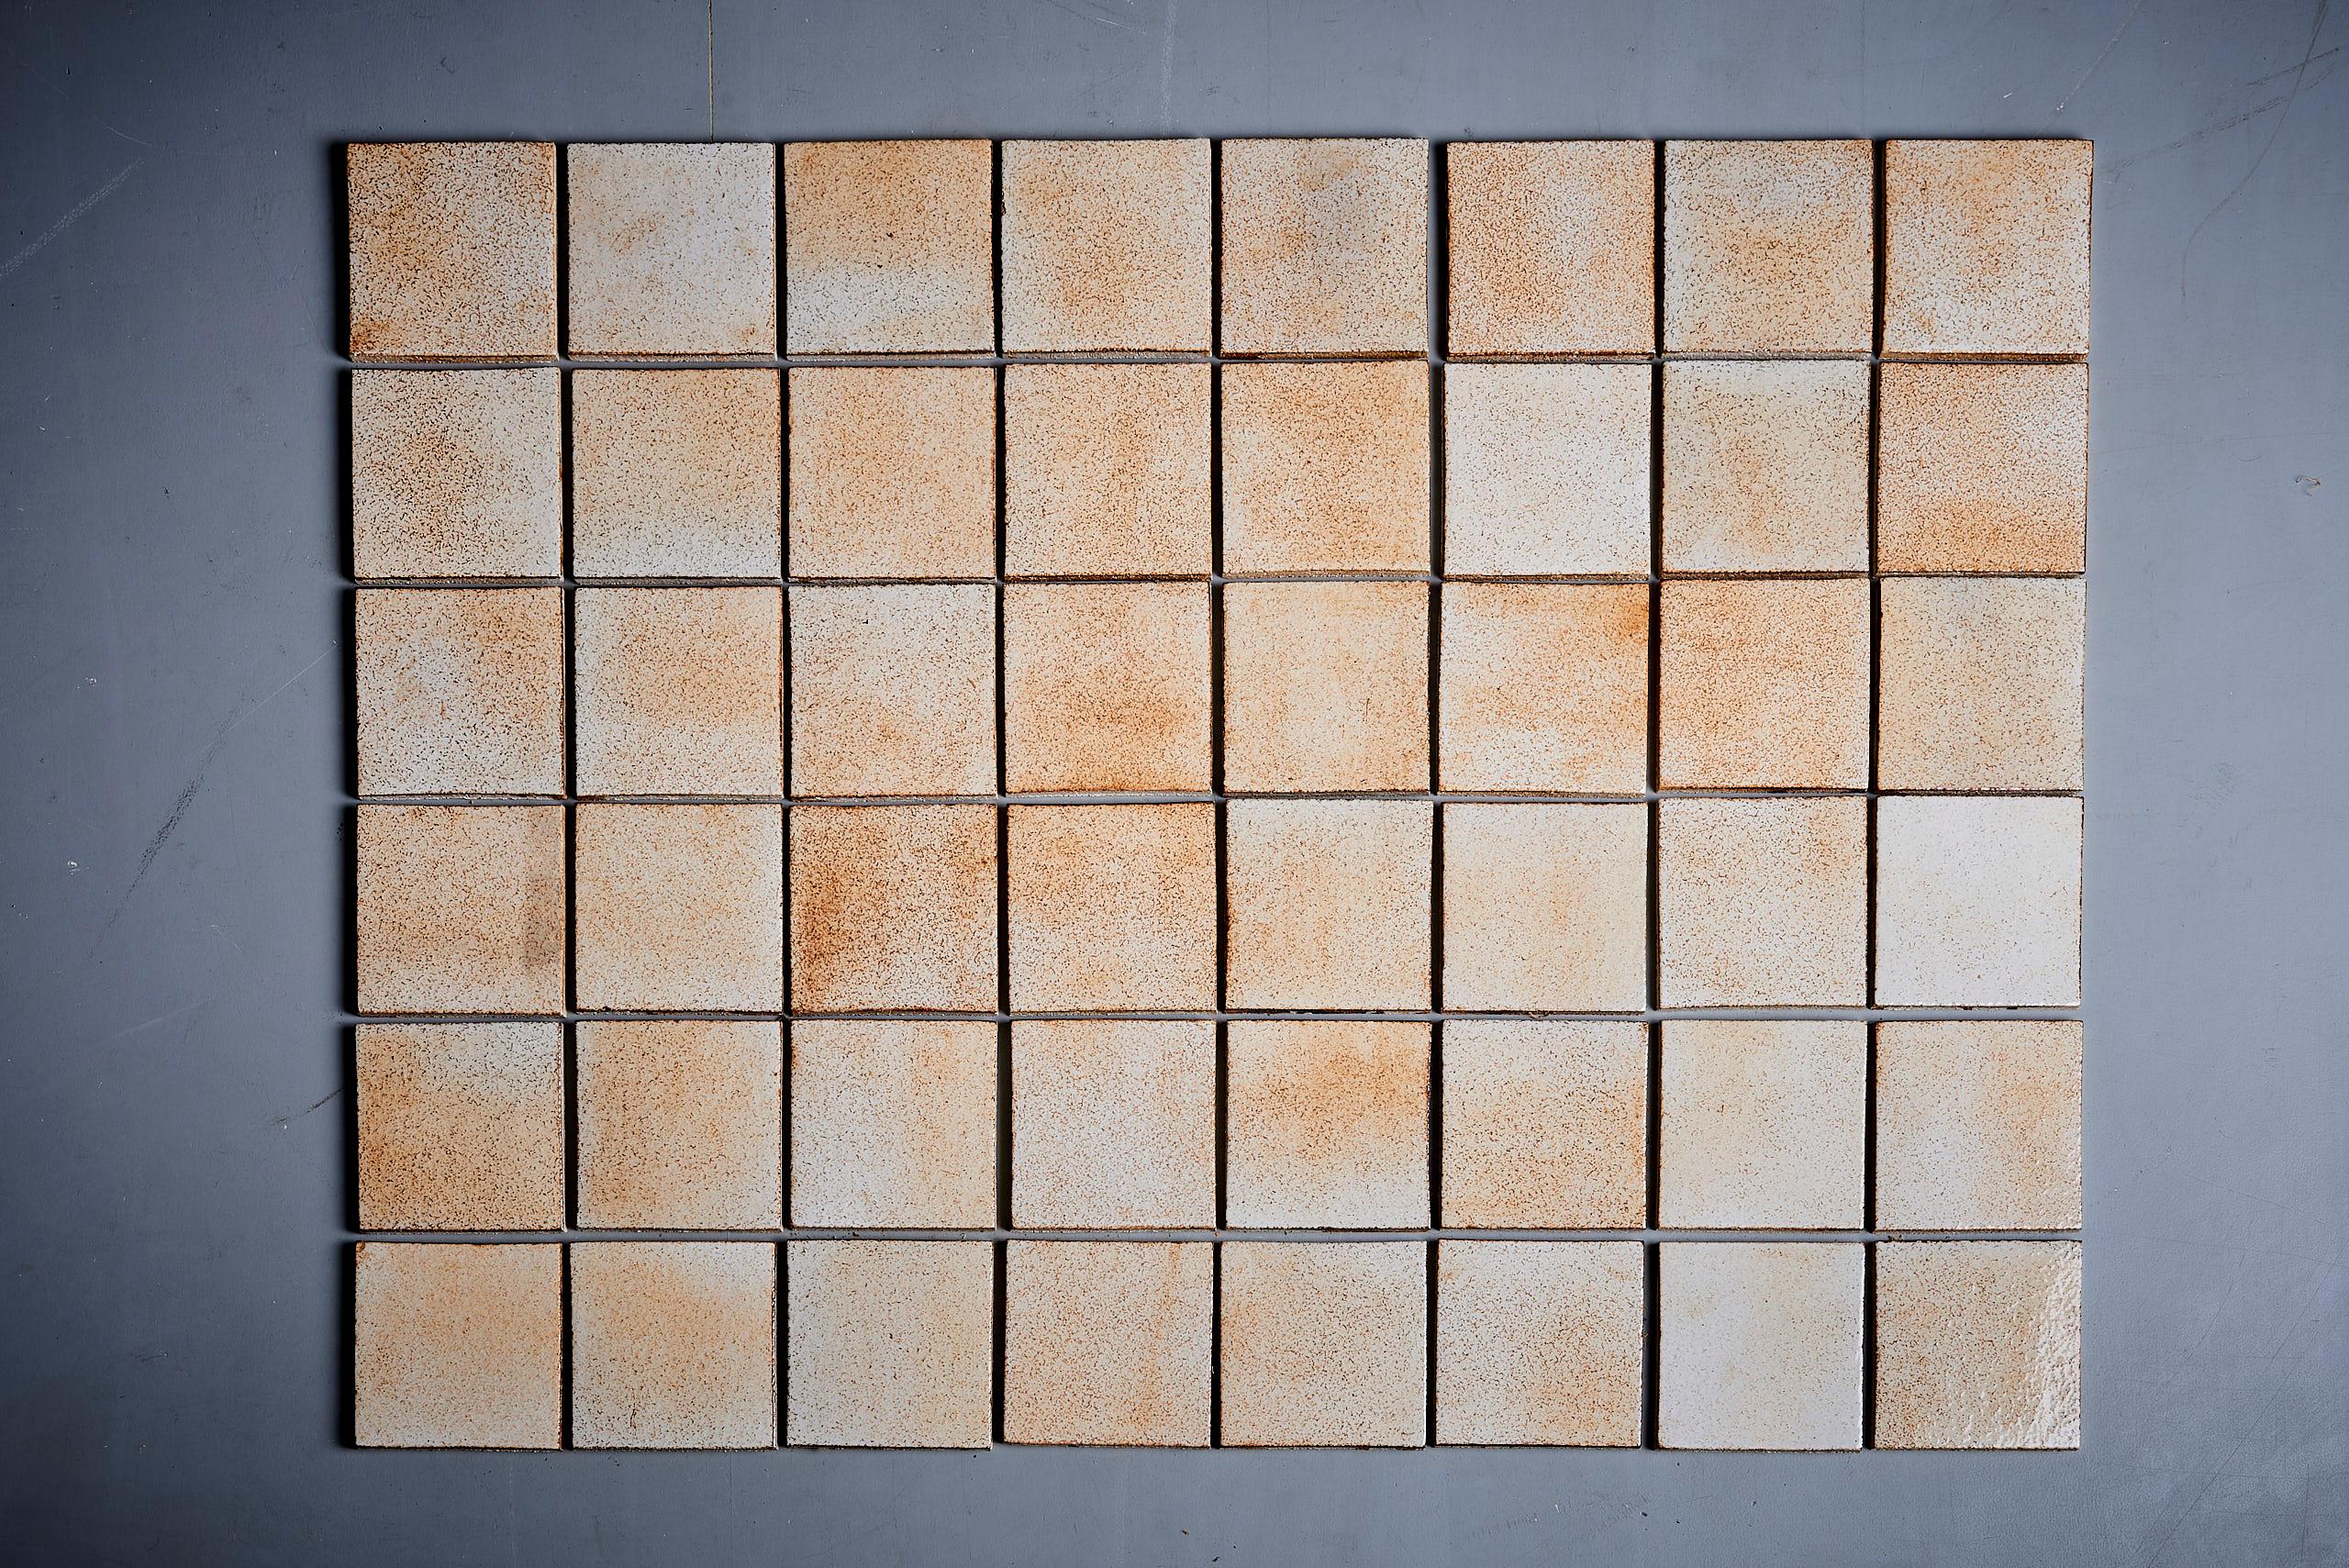 Set of 169 tiles (around 3 Sqm) by Roger Capron, France - 1970s. 